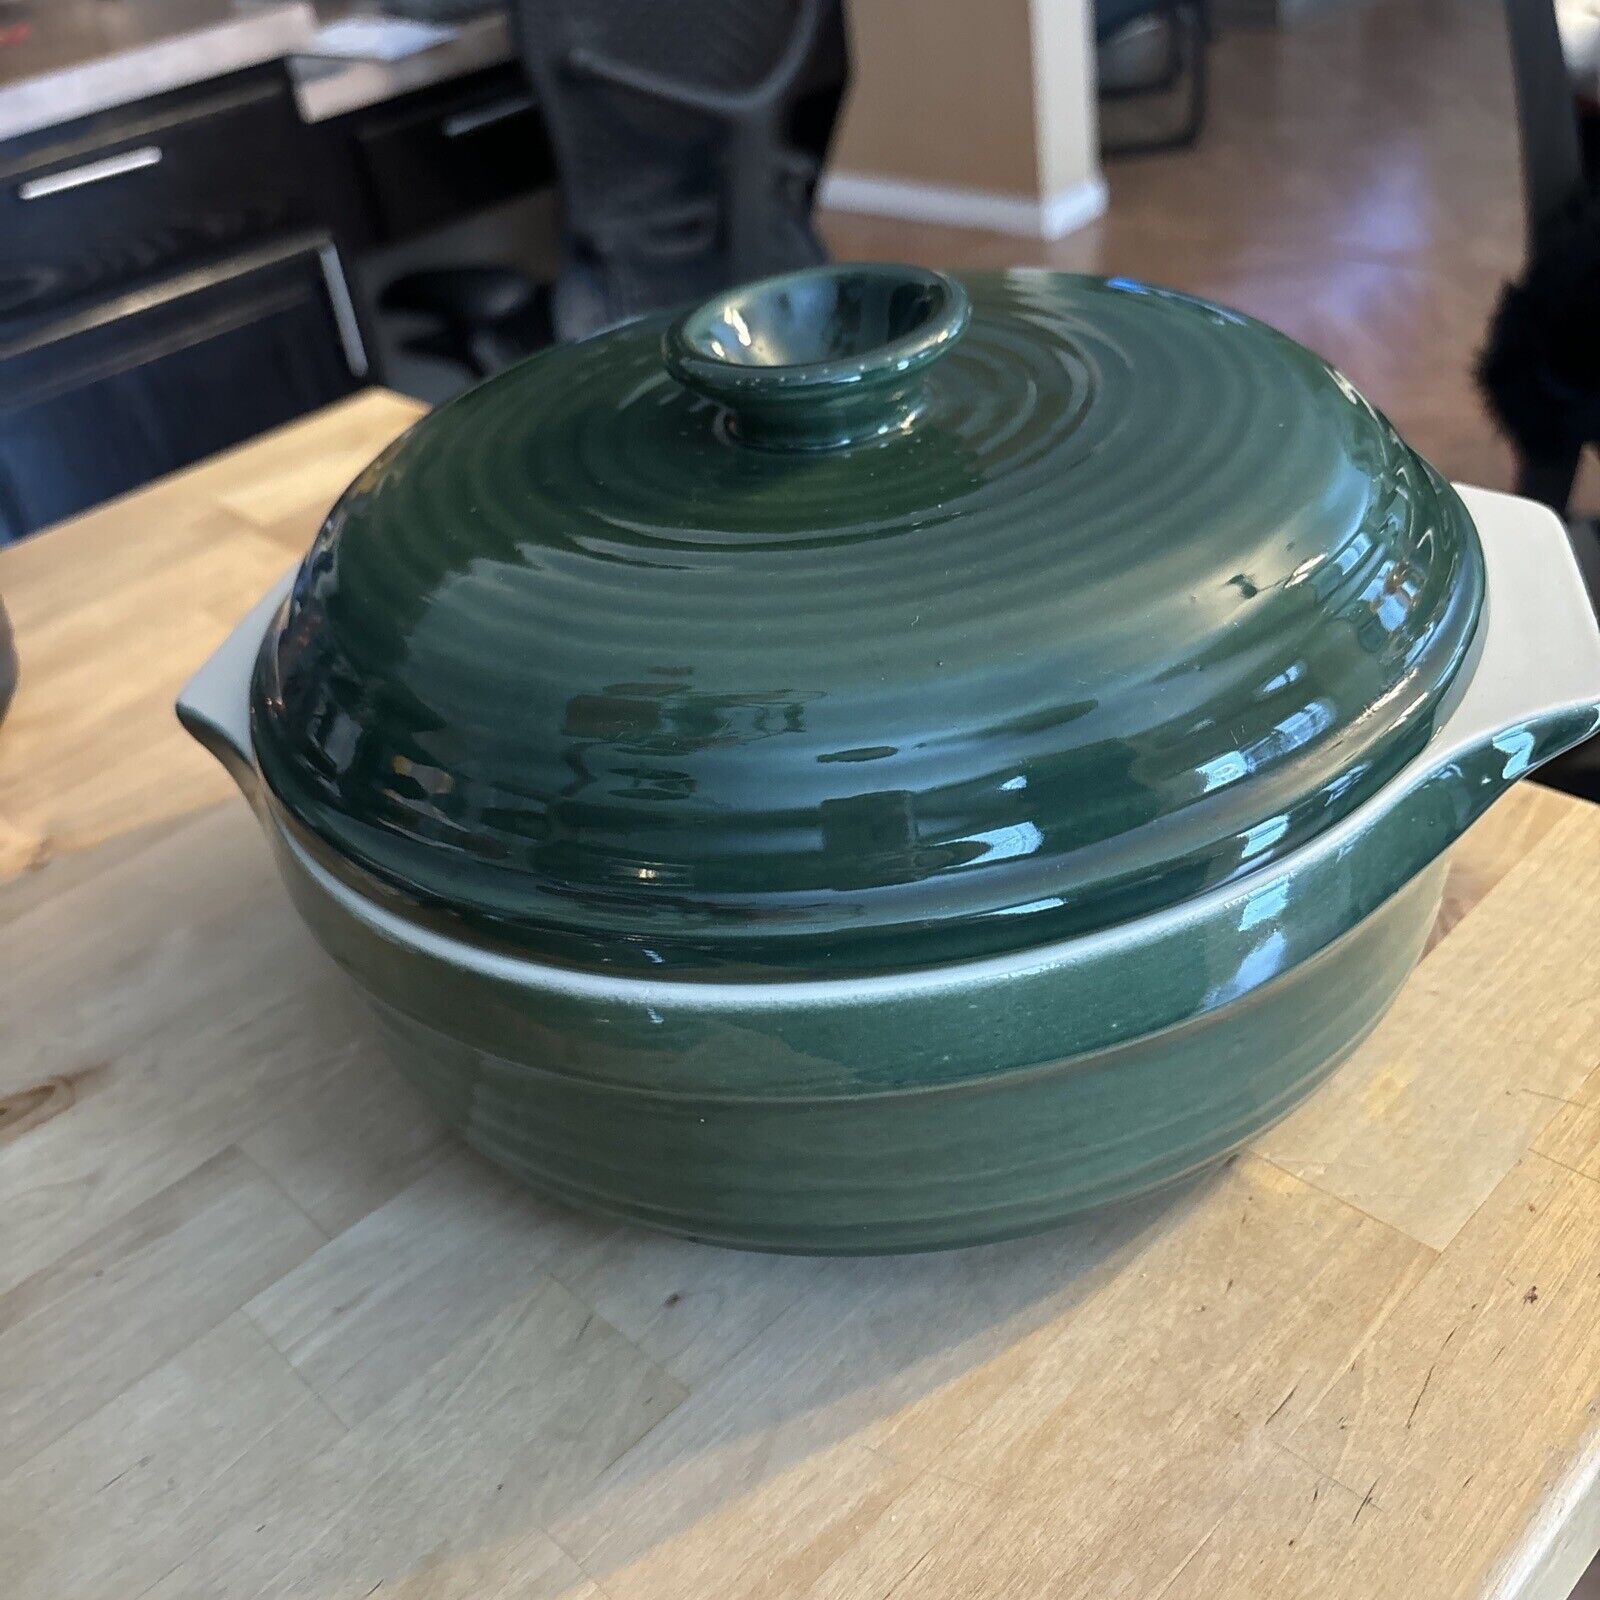 Emile Henry French Green Stoneware Dutch Oven Covered Casserole Dish